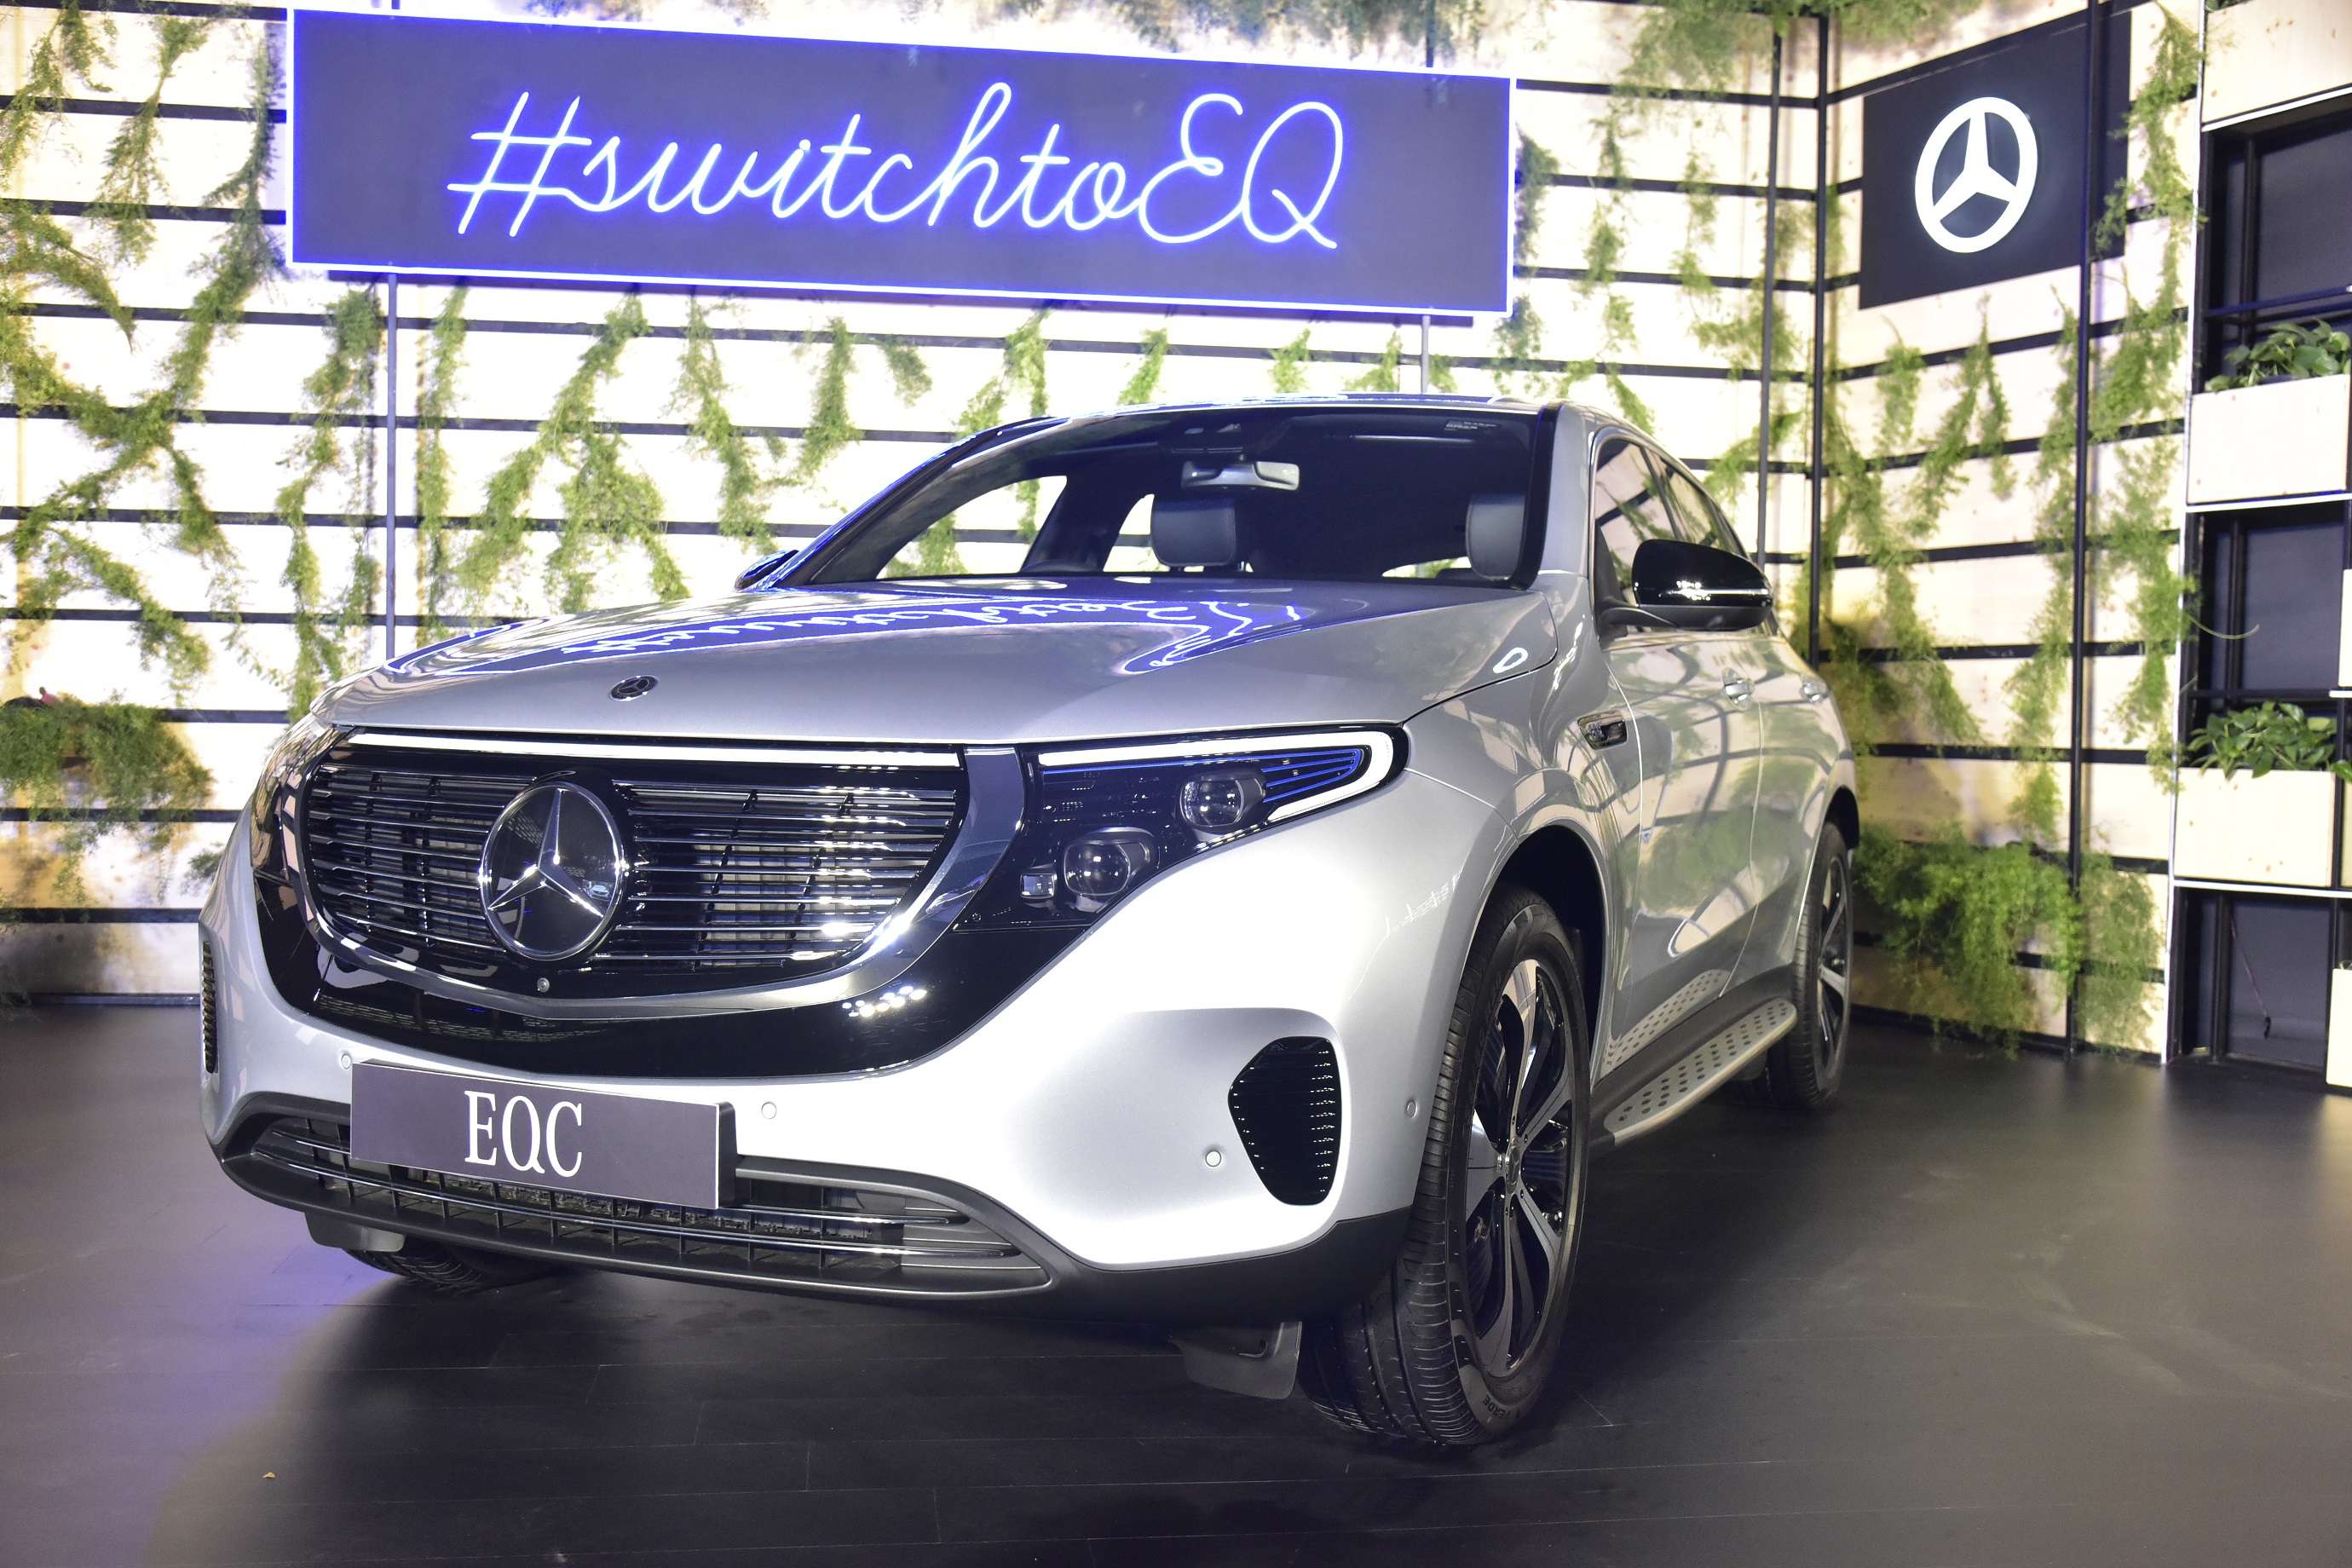 Mercedes-Benz is very satisfied with the positive customer response to the EQC since its India.